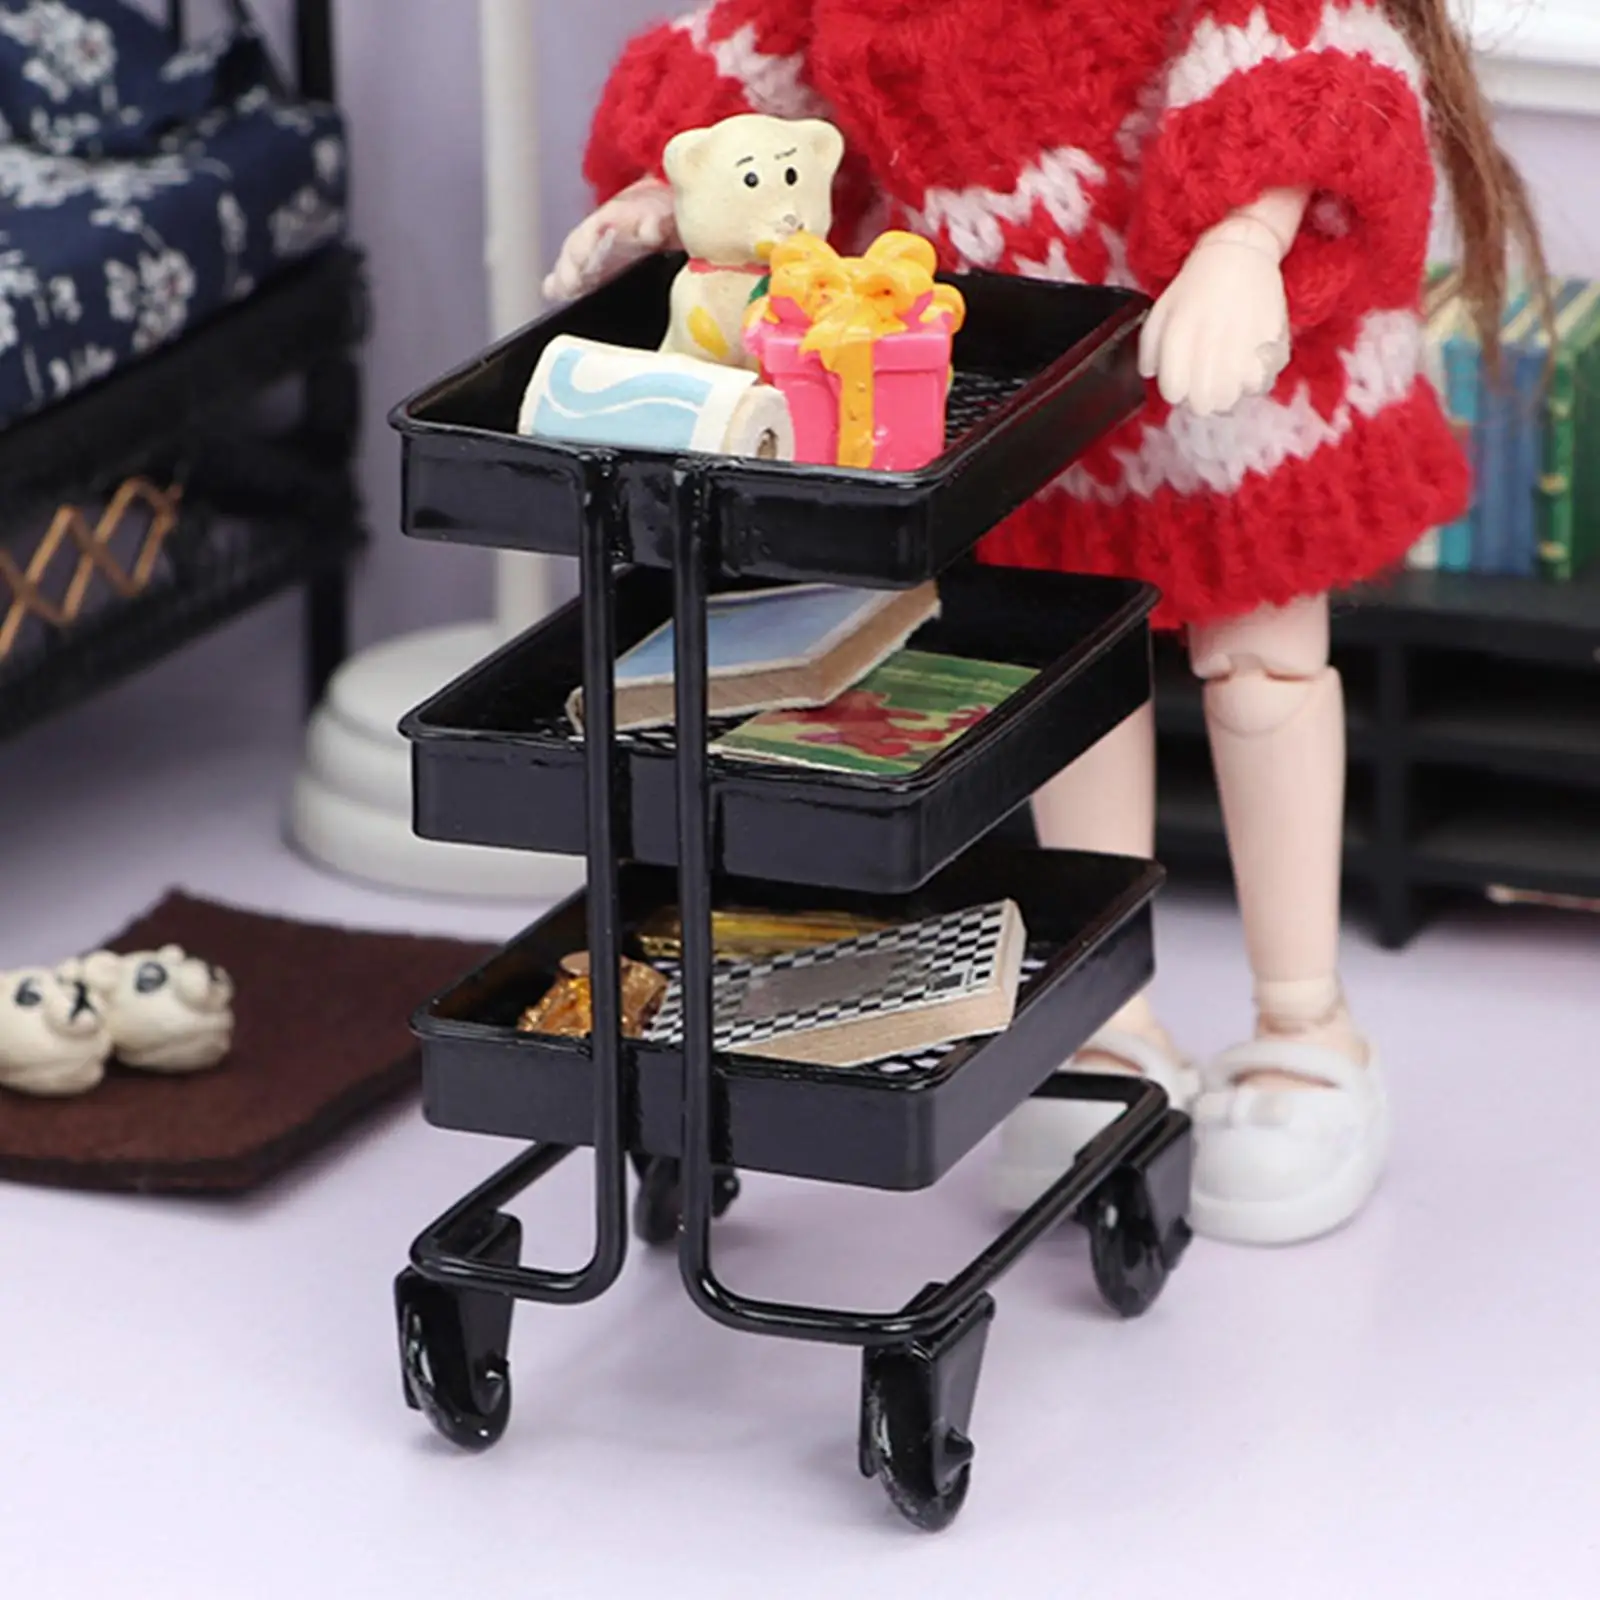 1/12 Dollhouse 3 Tier Miniature Rolling Cart Storage with Wheels Decoration